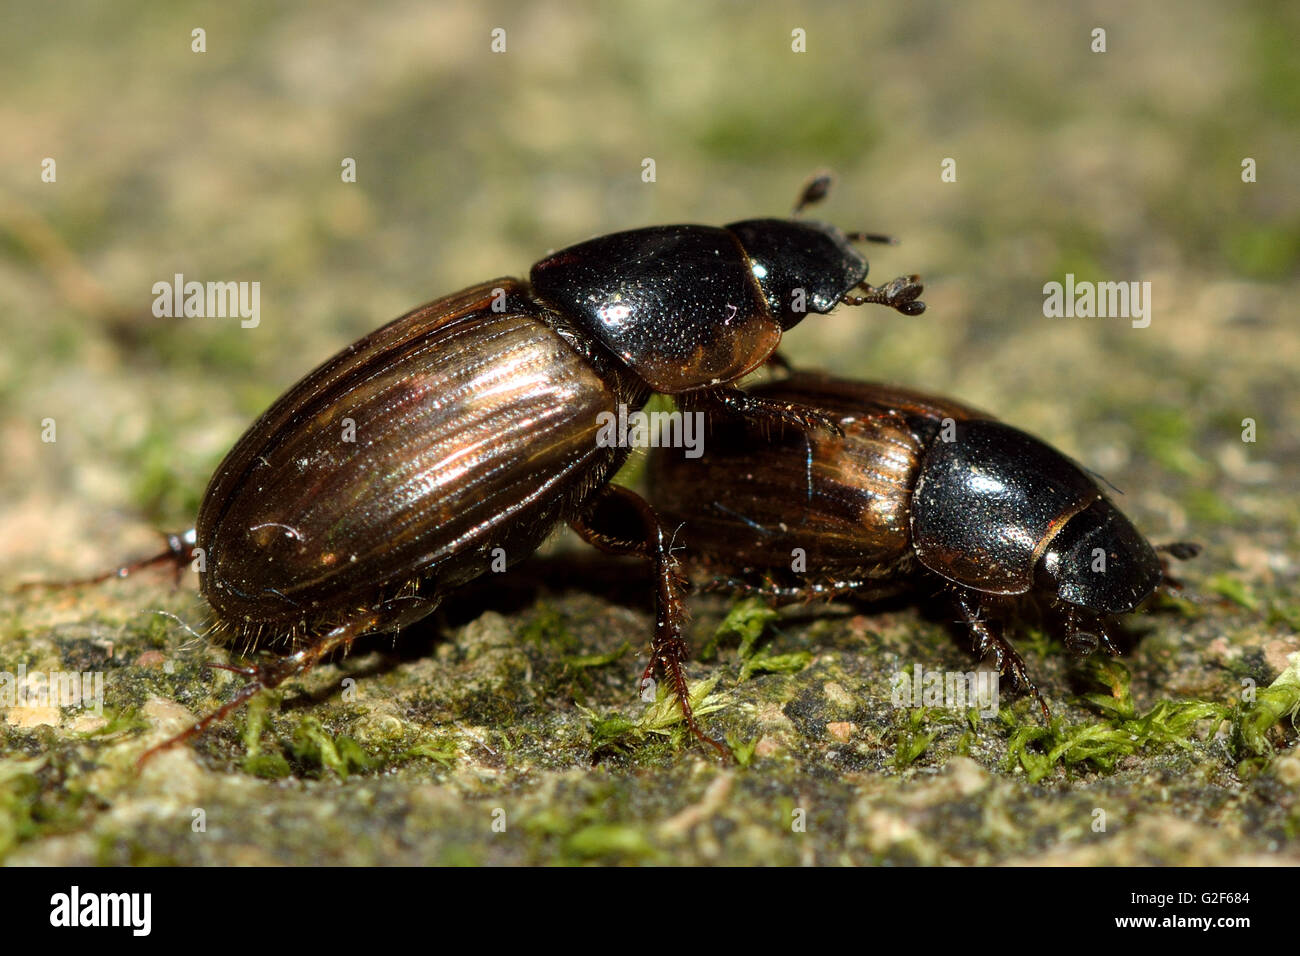 Aphodius prodromus and A. sphacelatus dung beetles. Comparison of insects in family Scarabaeidae with larger A. prodromus on top Stock Photo